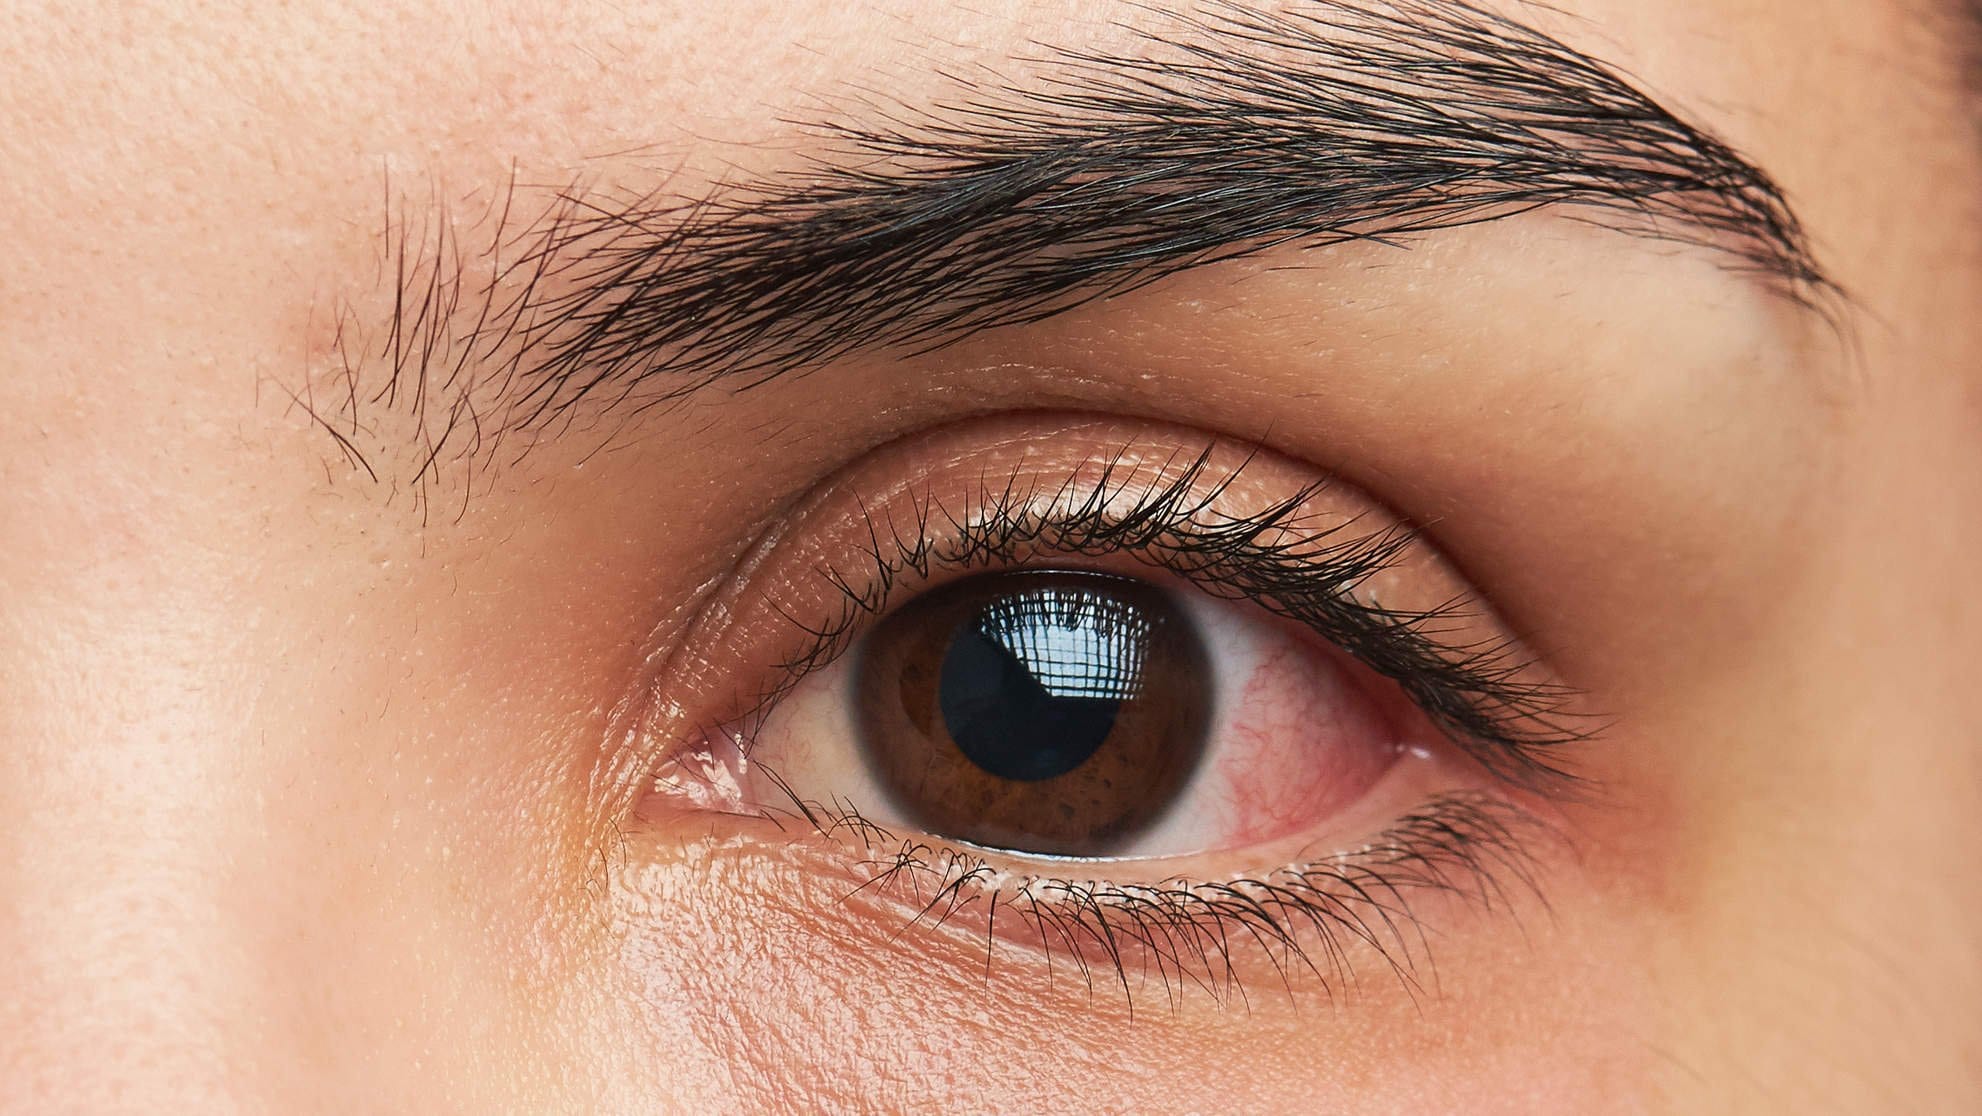 eye with infection | myDoc Urgent Care in Forest Hills, Queens, NY